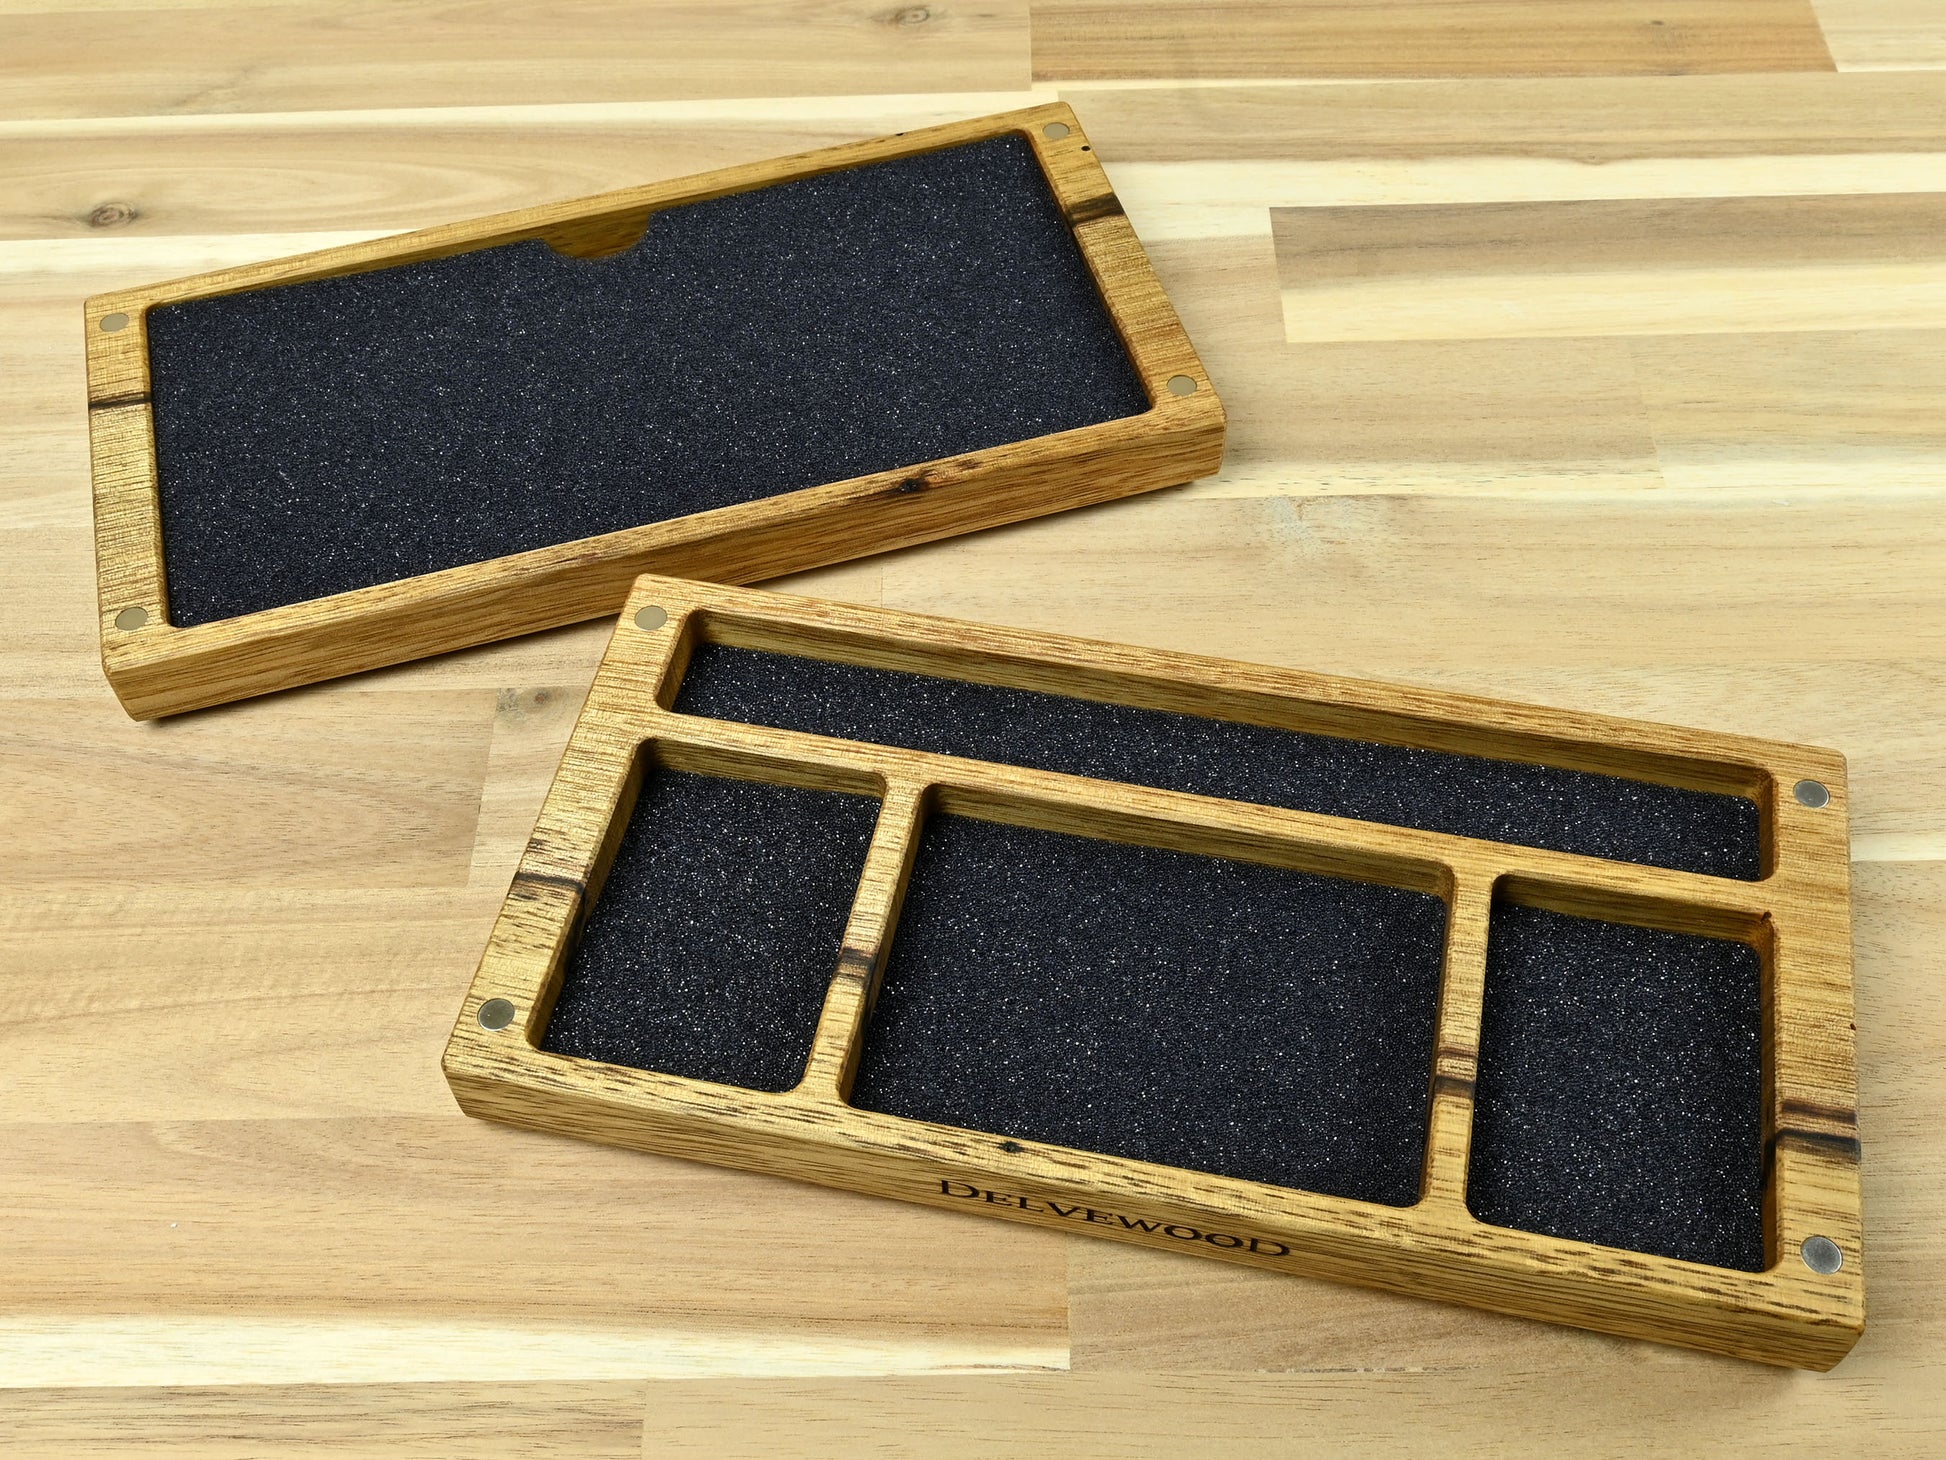 Black Limba Delver's kit dice box and tray for dnd rpg